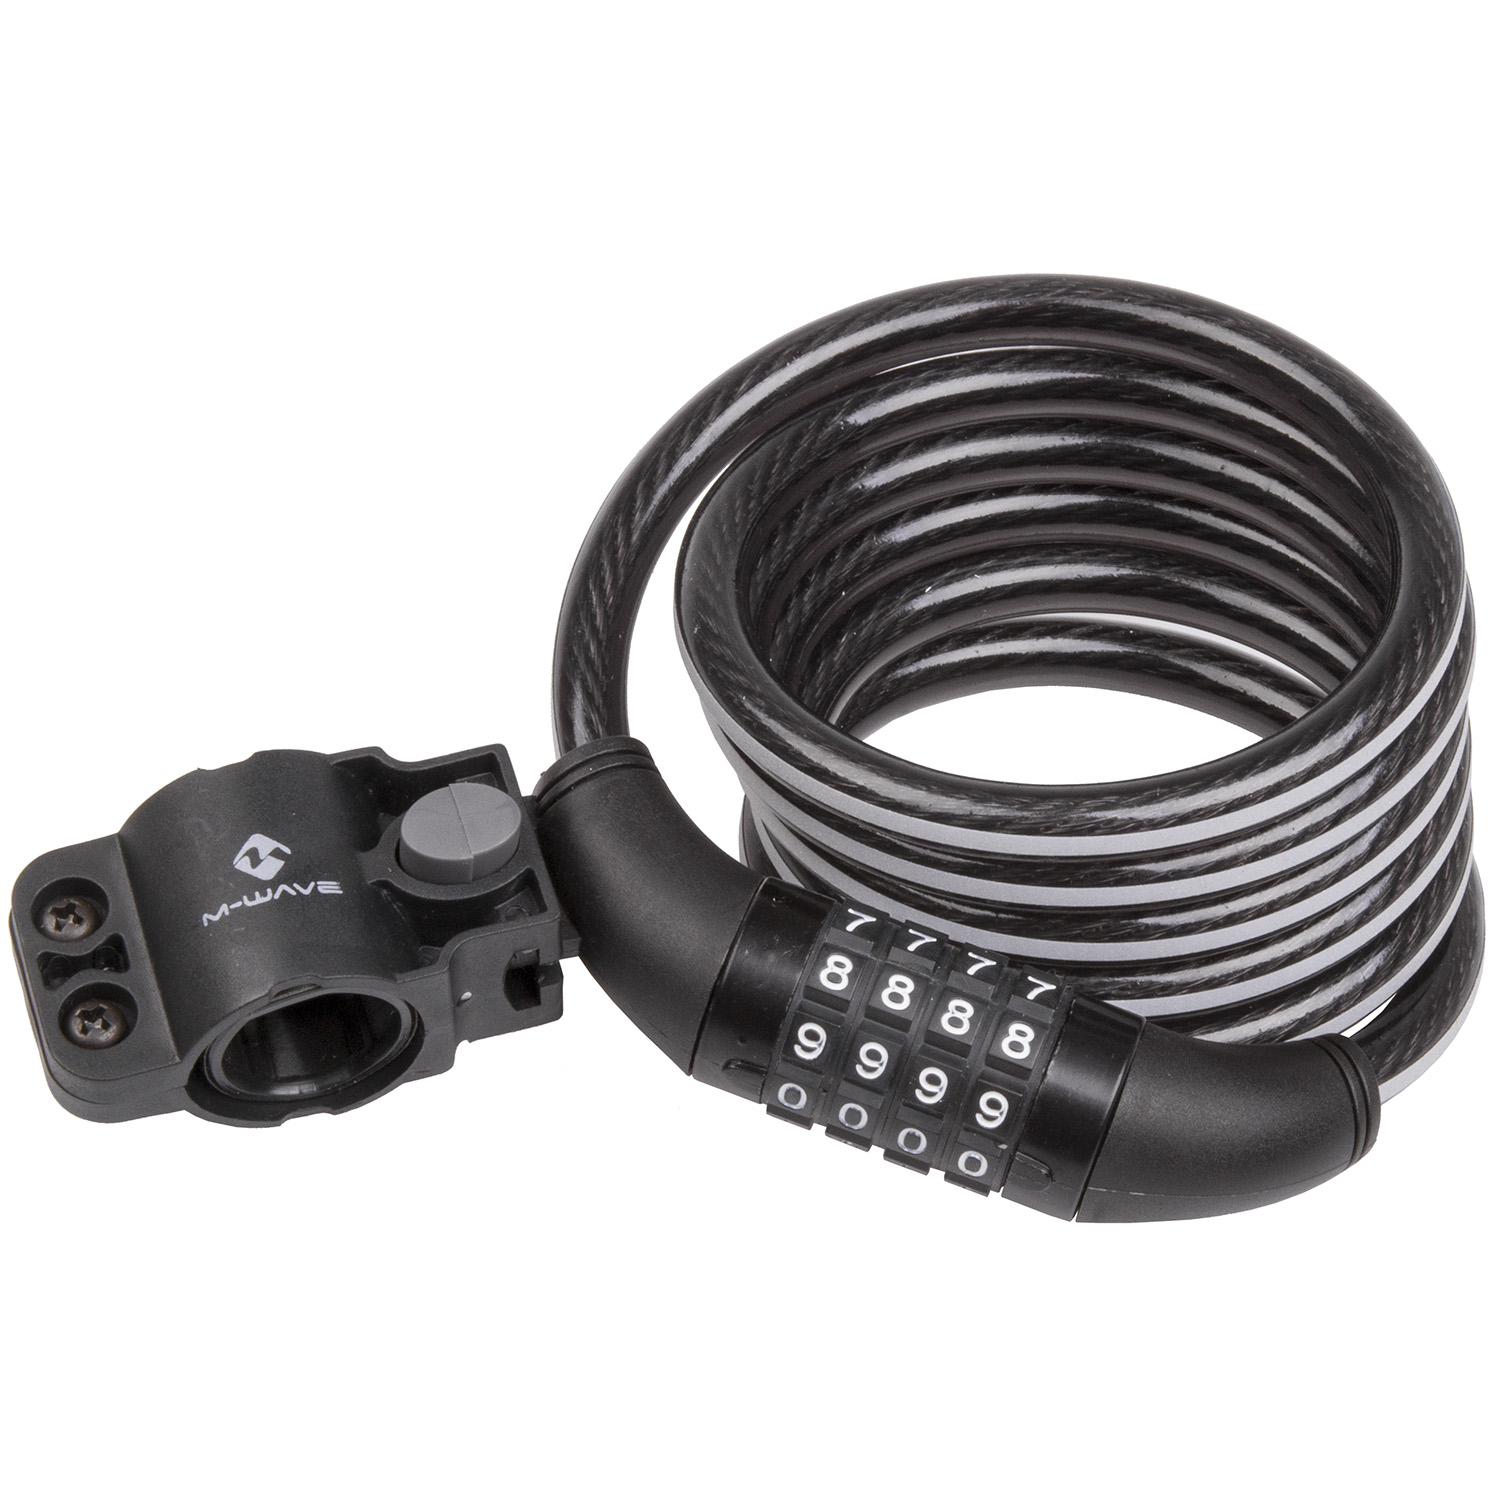 M-WAVE DS 10.18 Illu reflex spiral cable lock – AVAILABLE IN SELECTED BIKE SHOPS